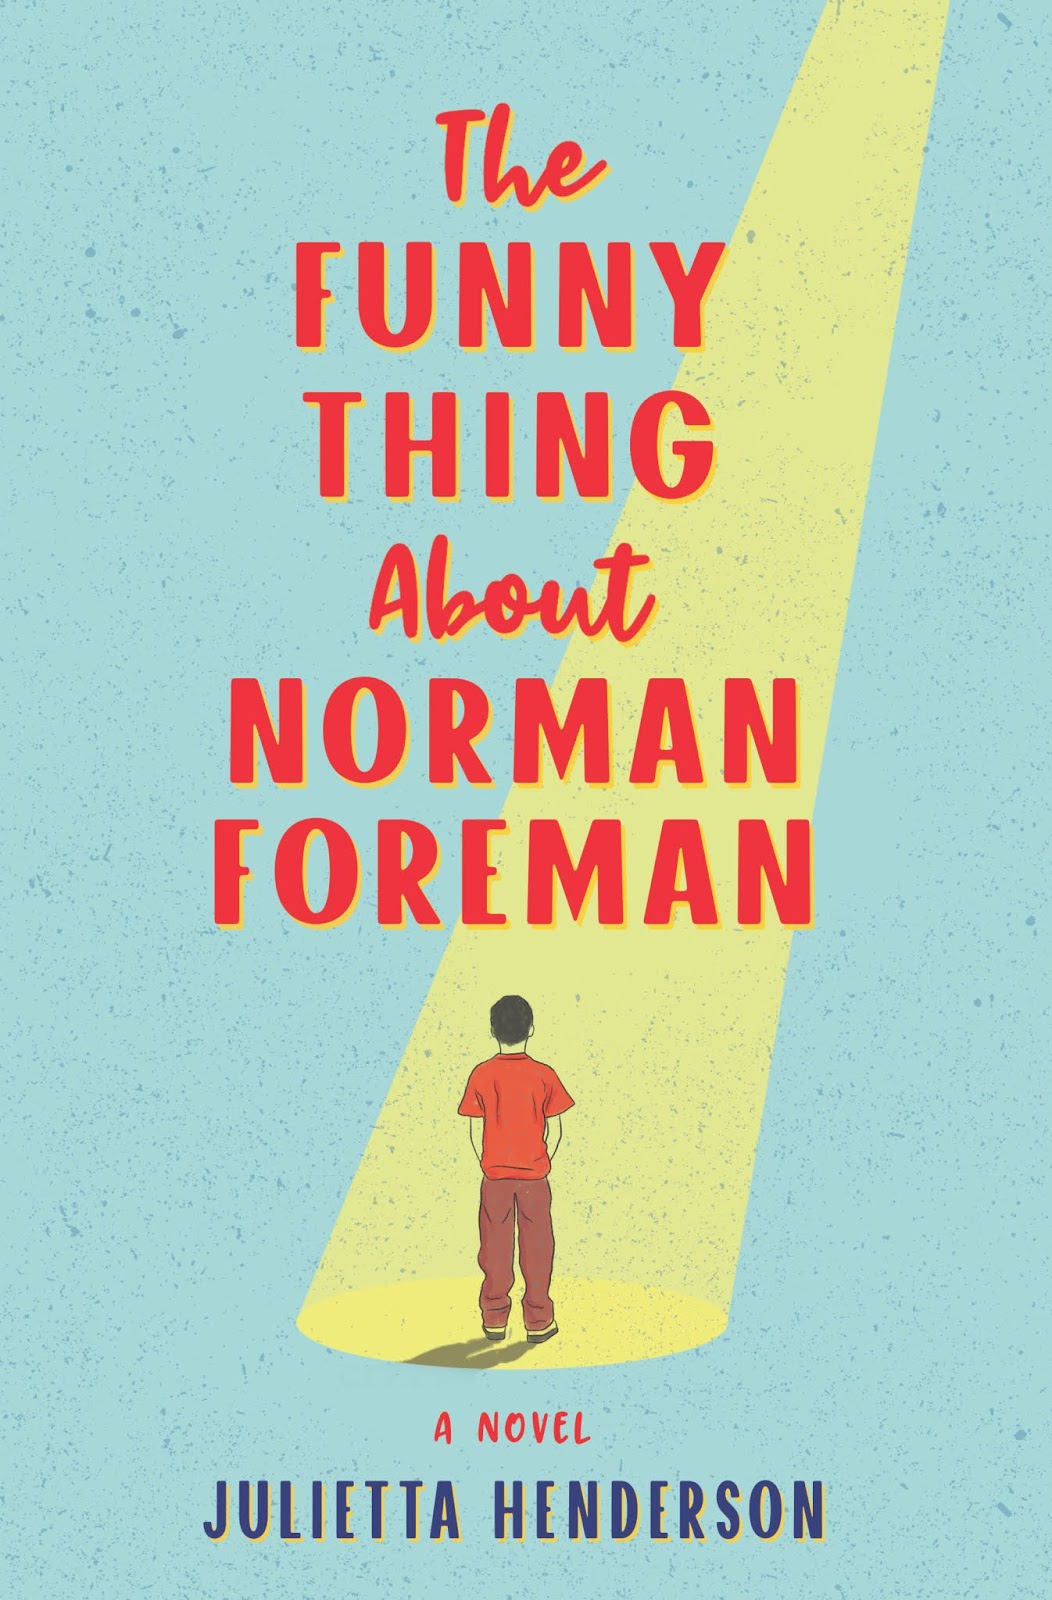 Blog Tour Stop & Excerpt: The Funny Thing About Norman Foreman by Julietta Henderson